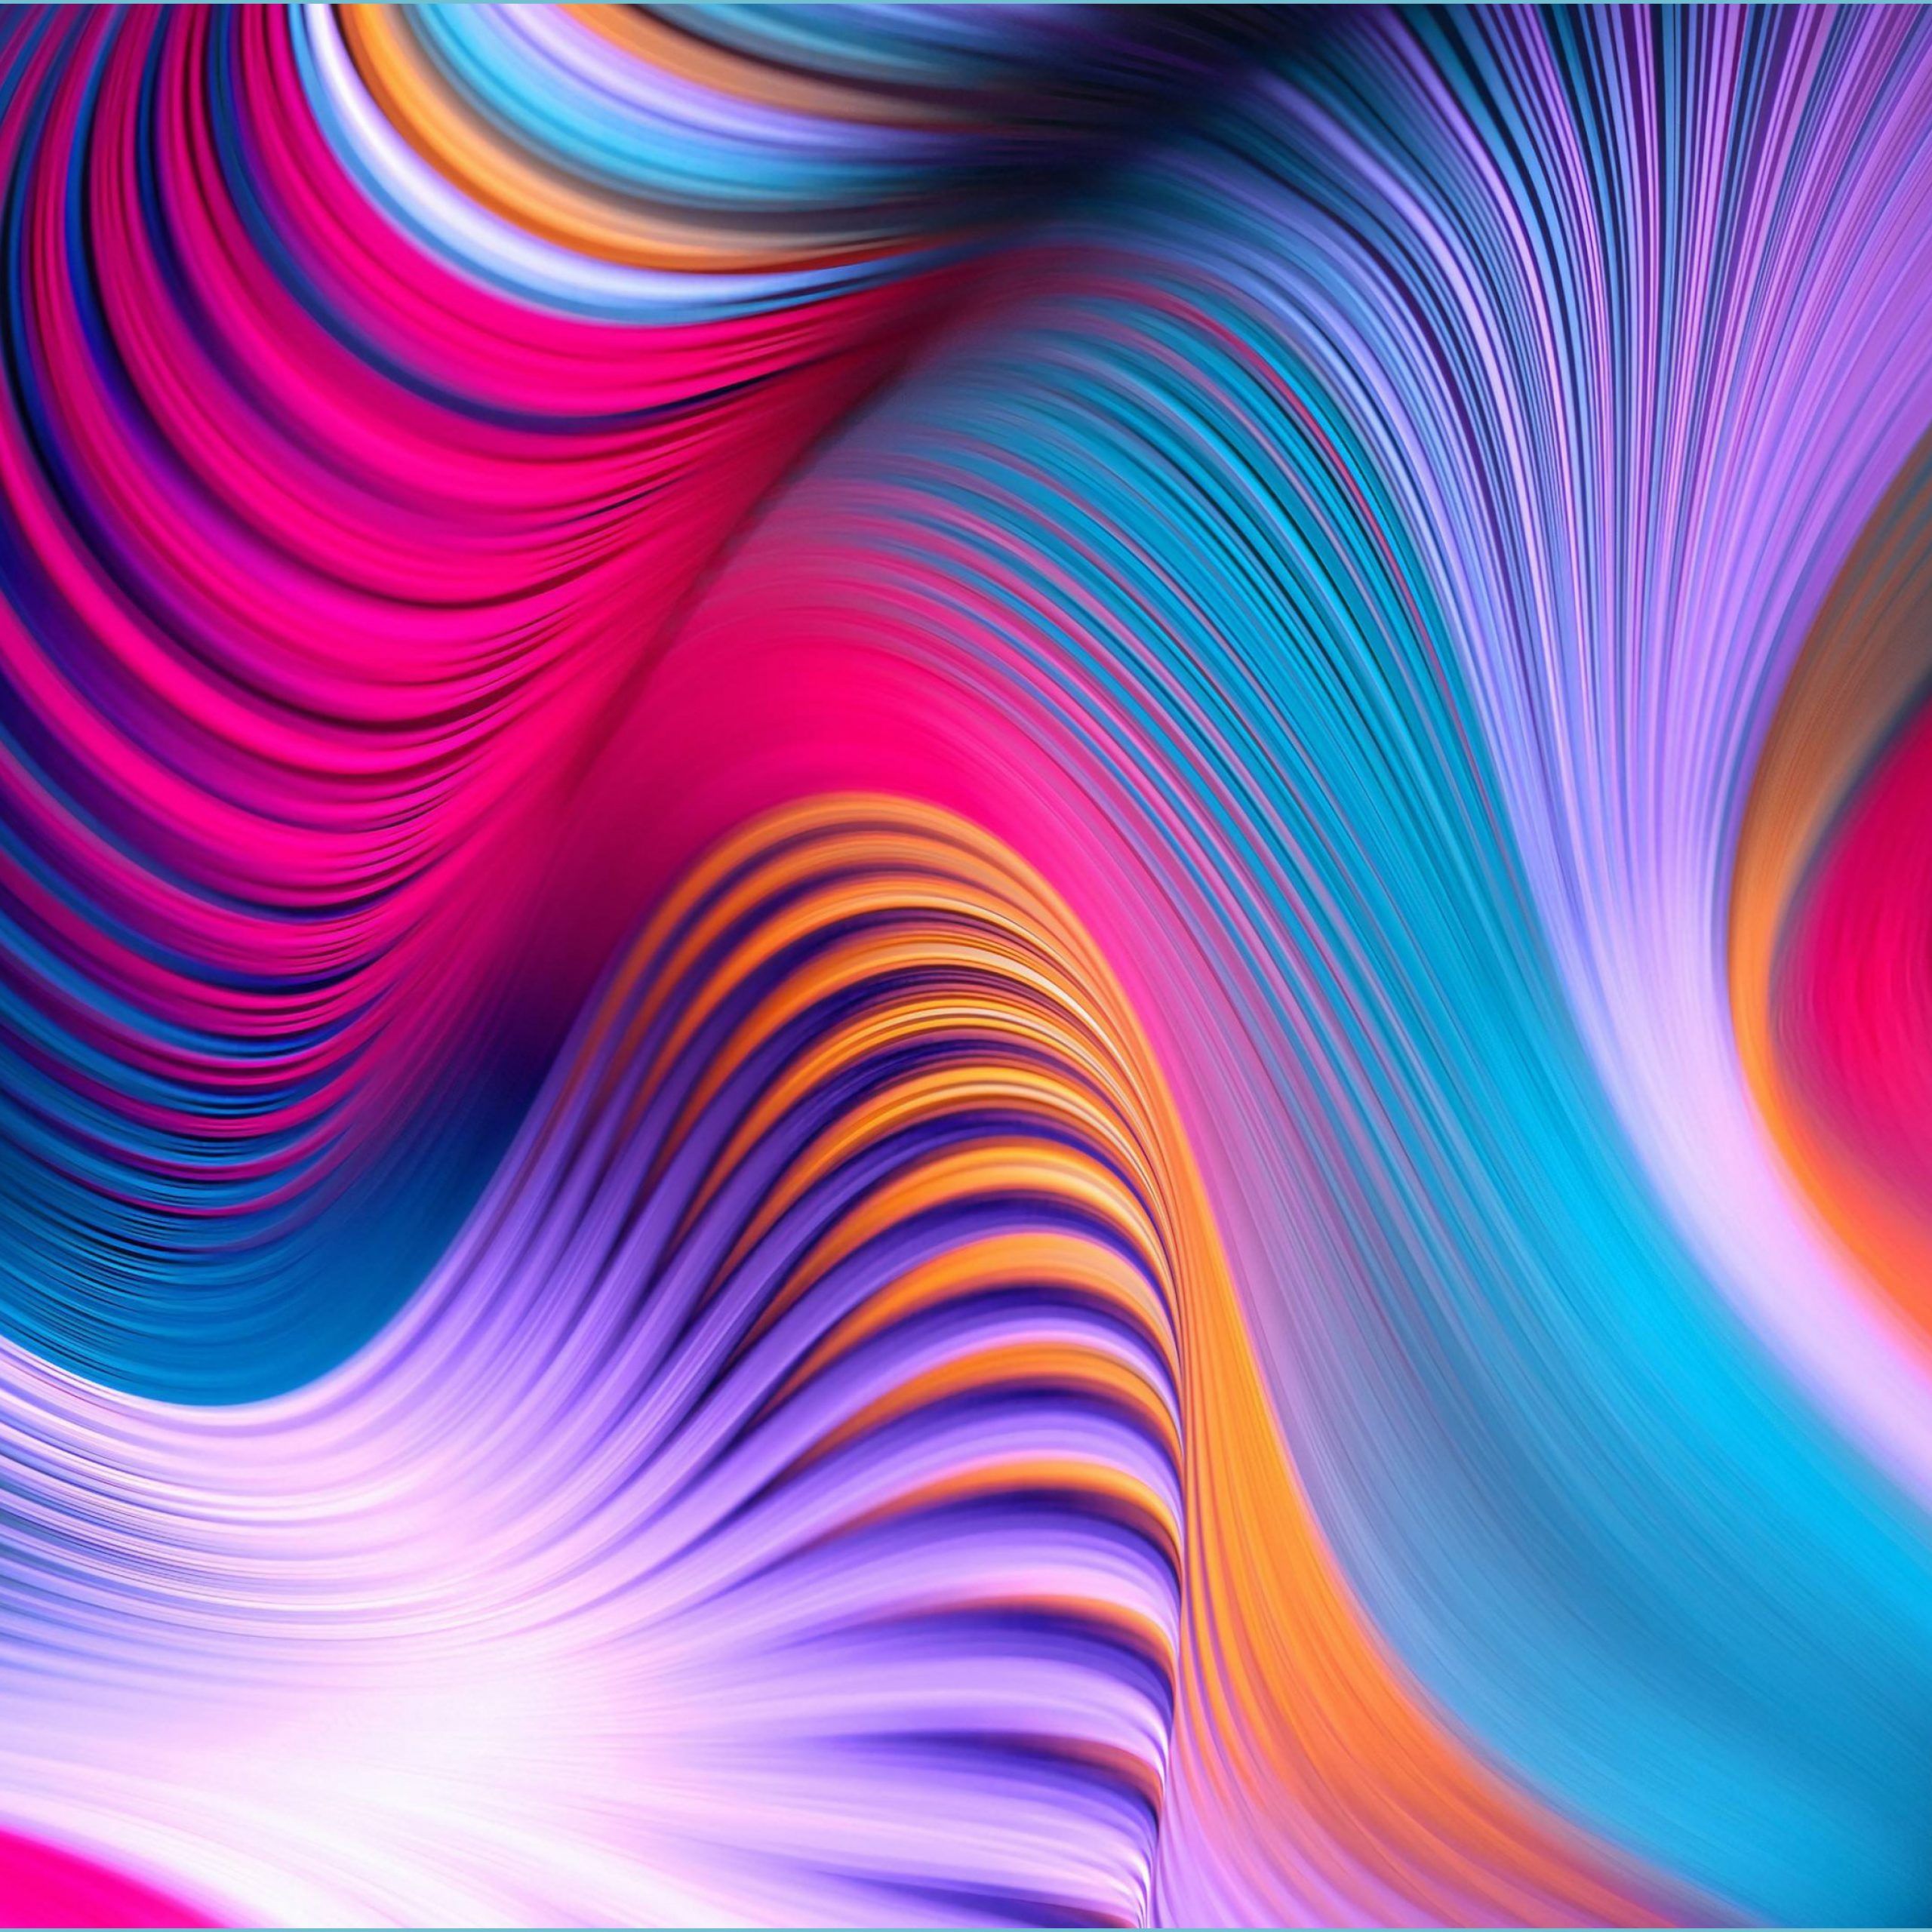 Colorful 10K Wallpaper For Your Desktop Or Mobile Screen Free And Wallpaper 4k